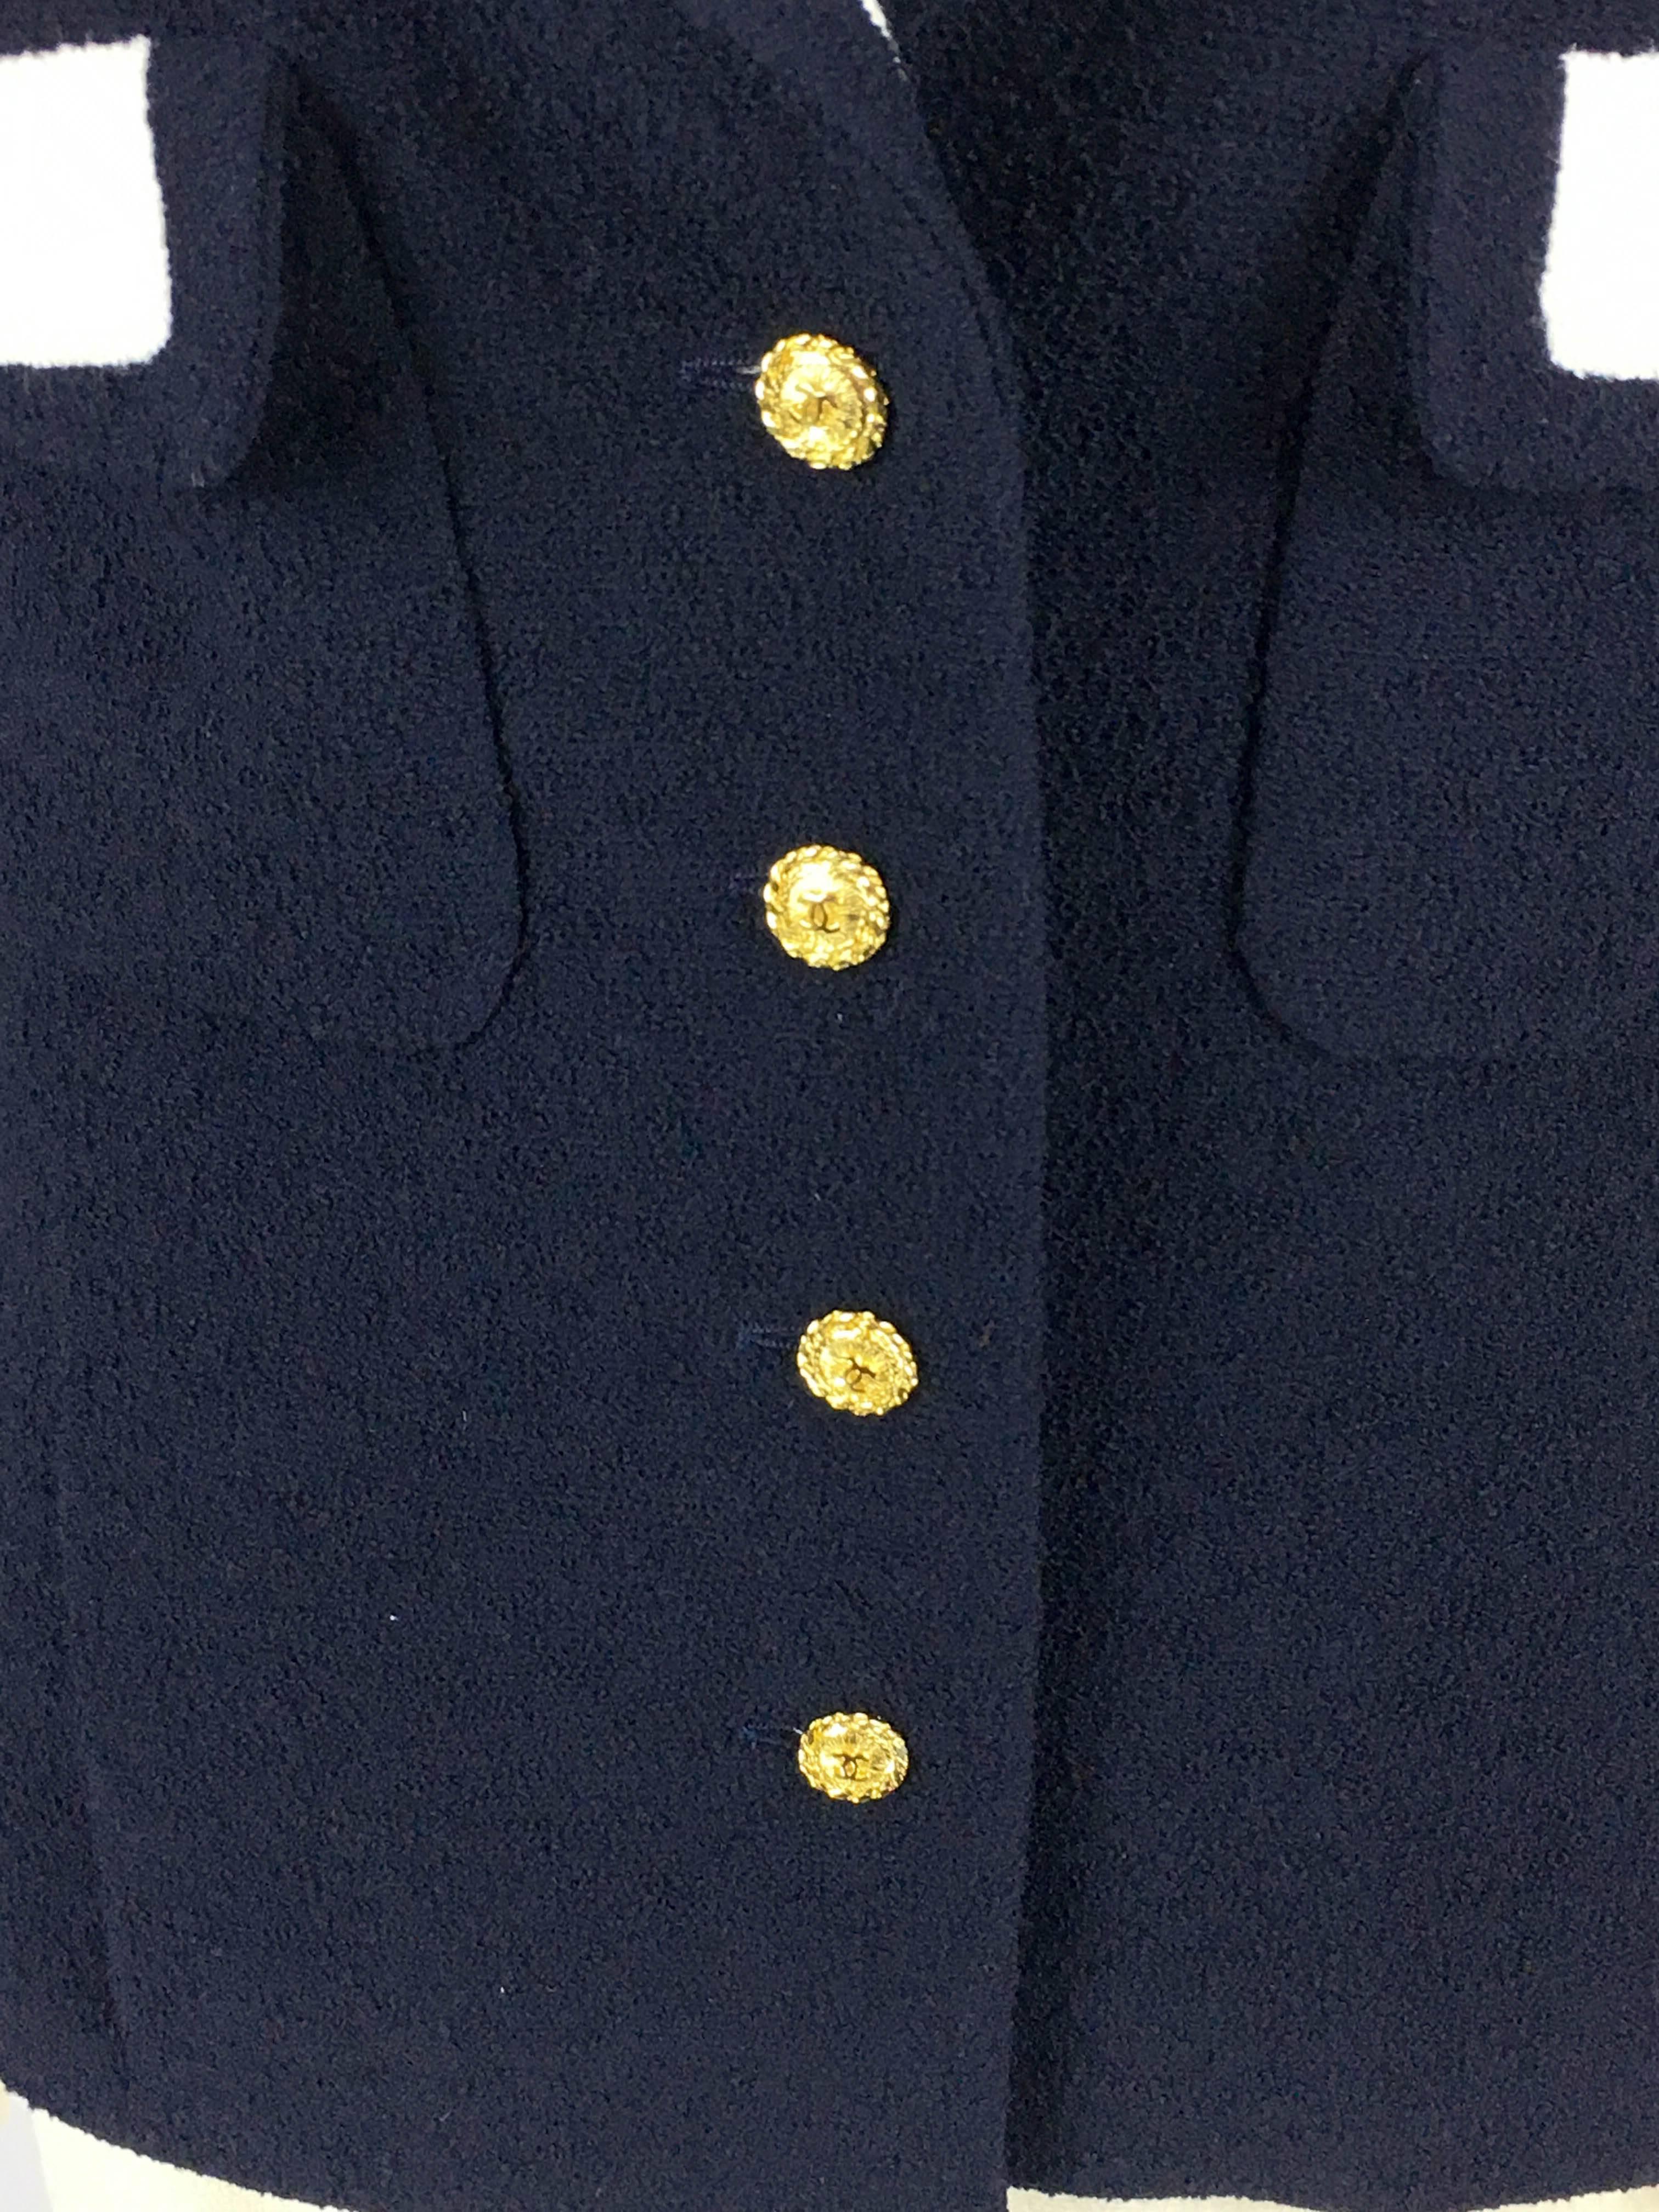 Chanel Nautical Inspired Navy and White Wool Skirt Suit, Circa 1982 1